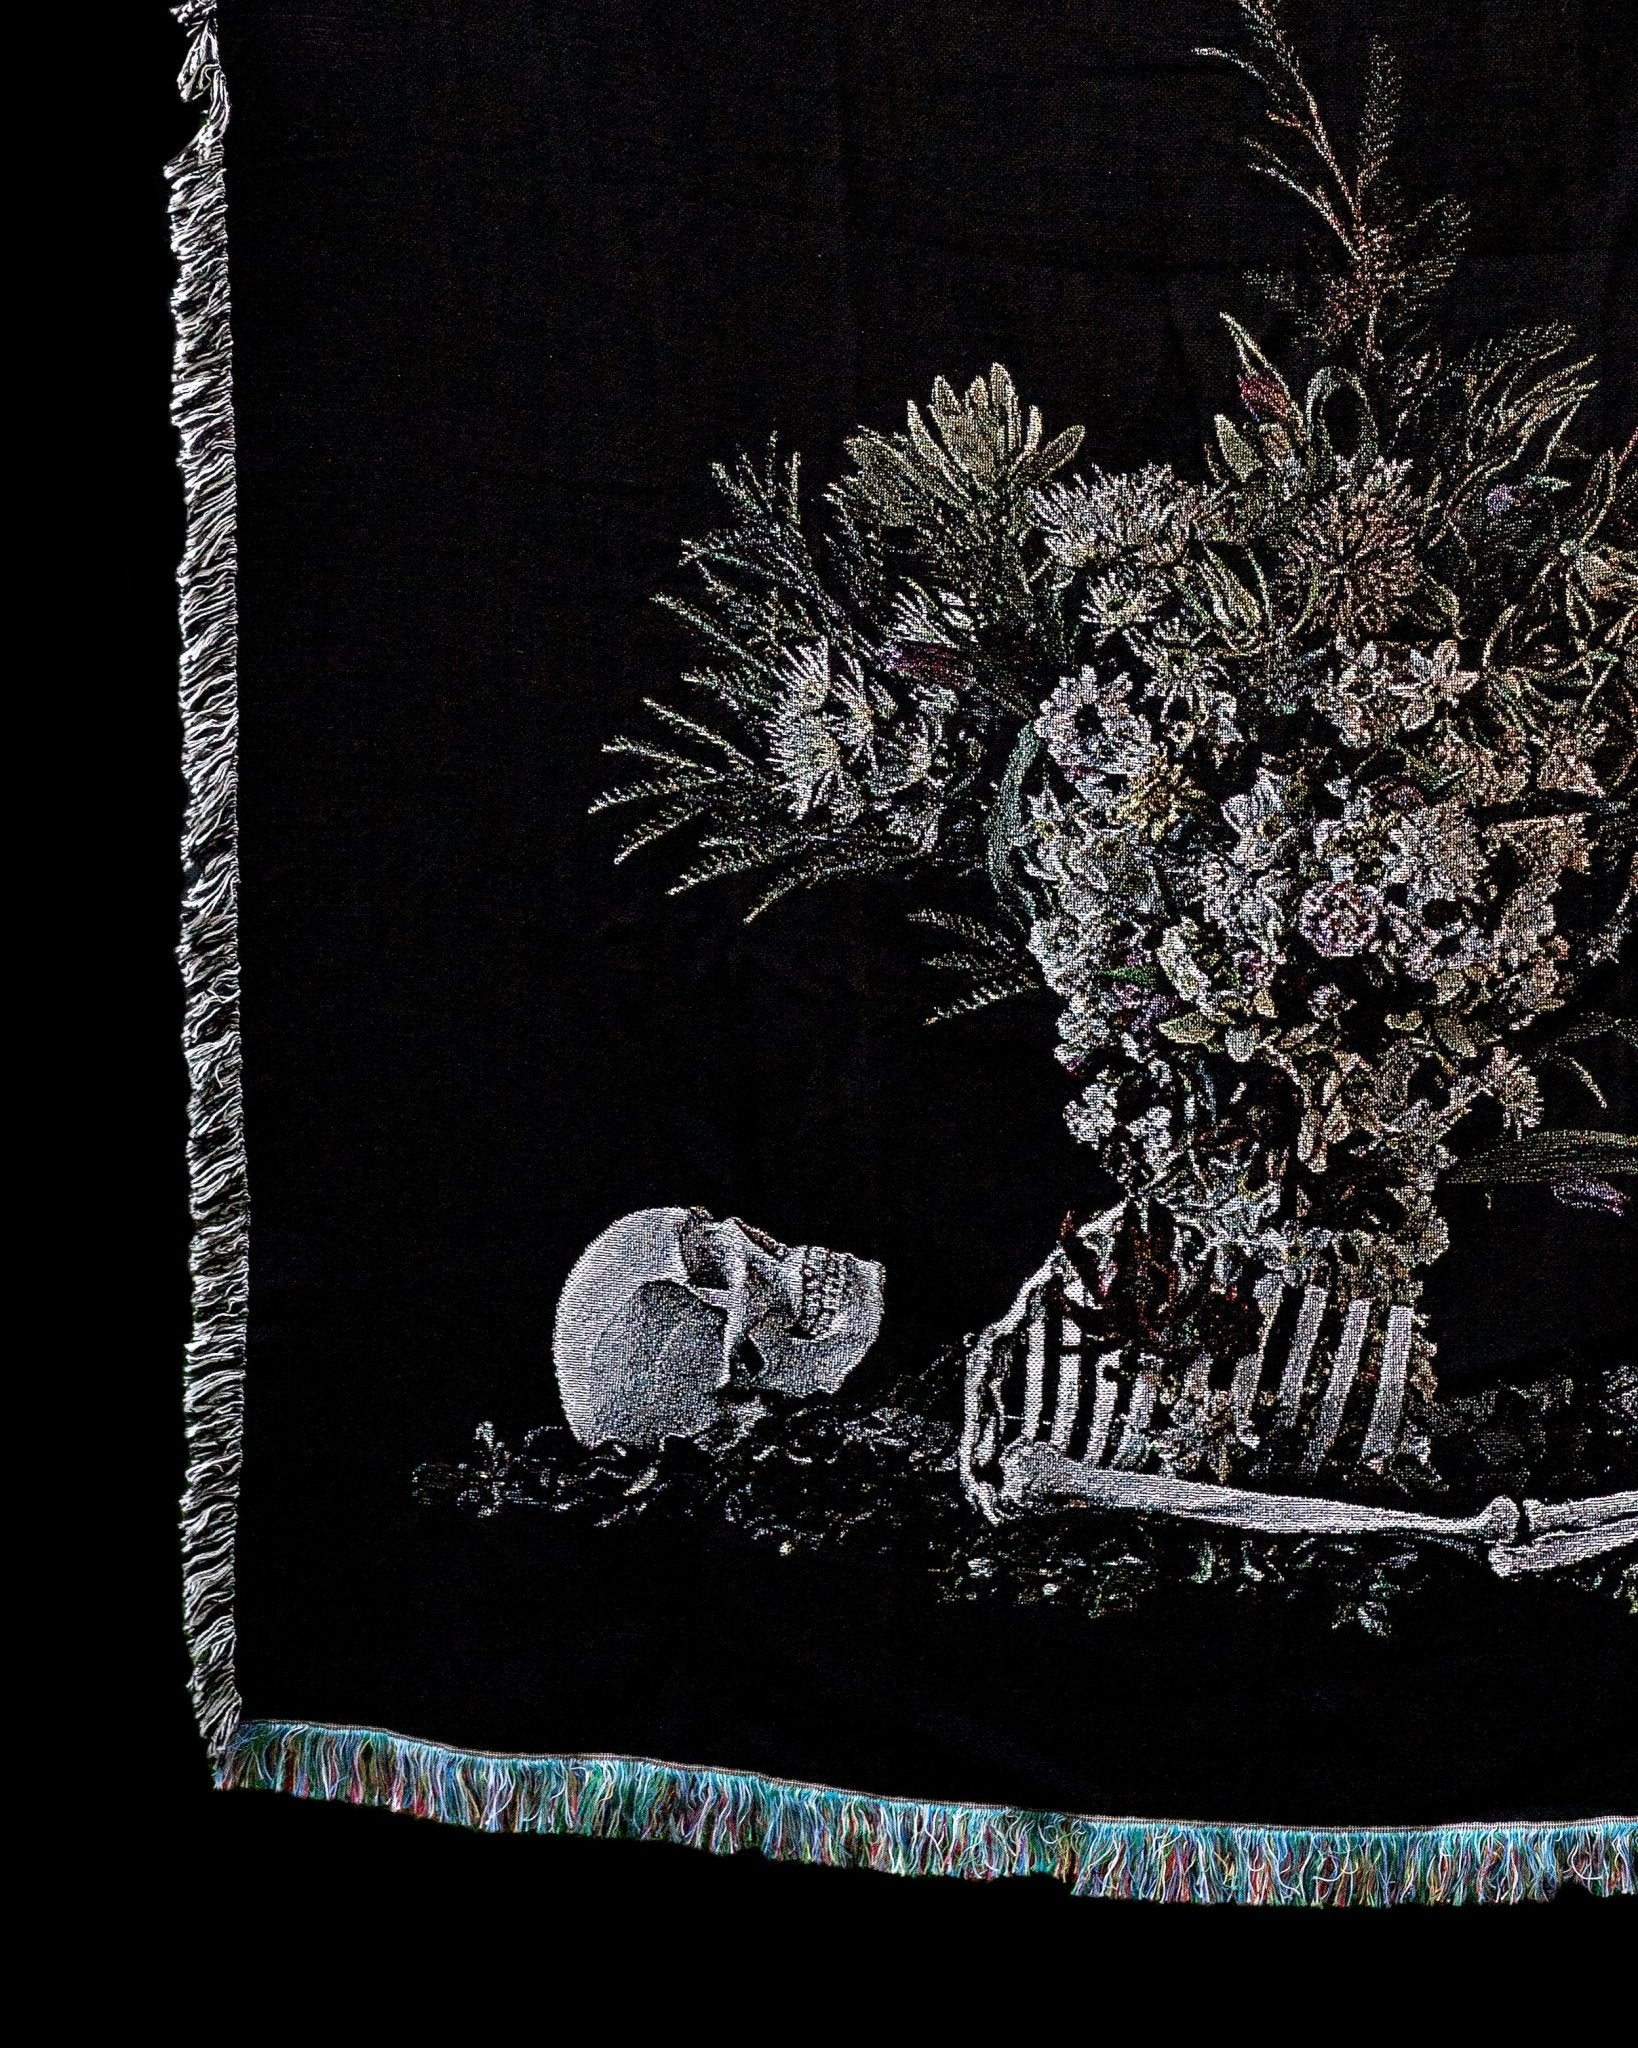 Egredior Tapestry Throw PREORDER (ships in 2 weeks) - Loved To Death